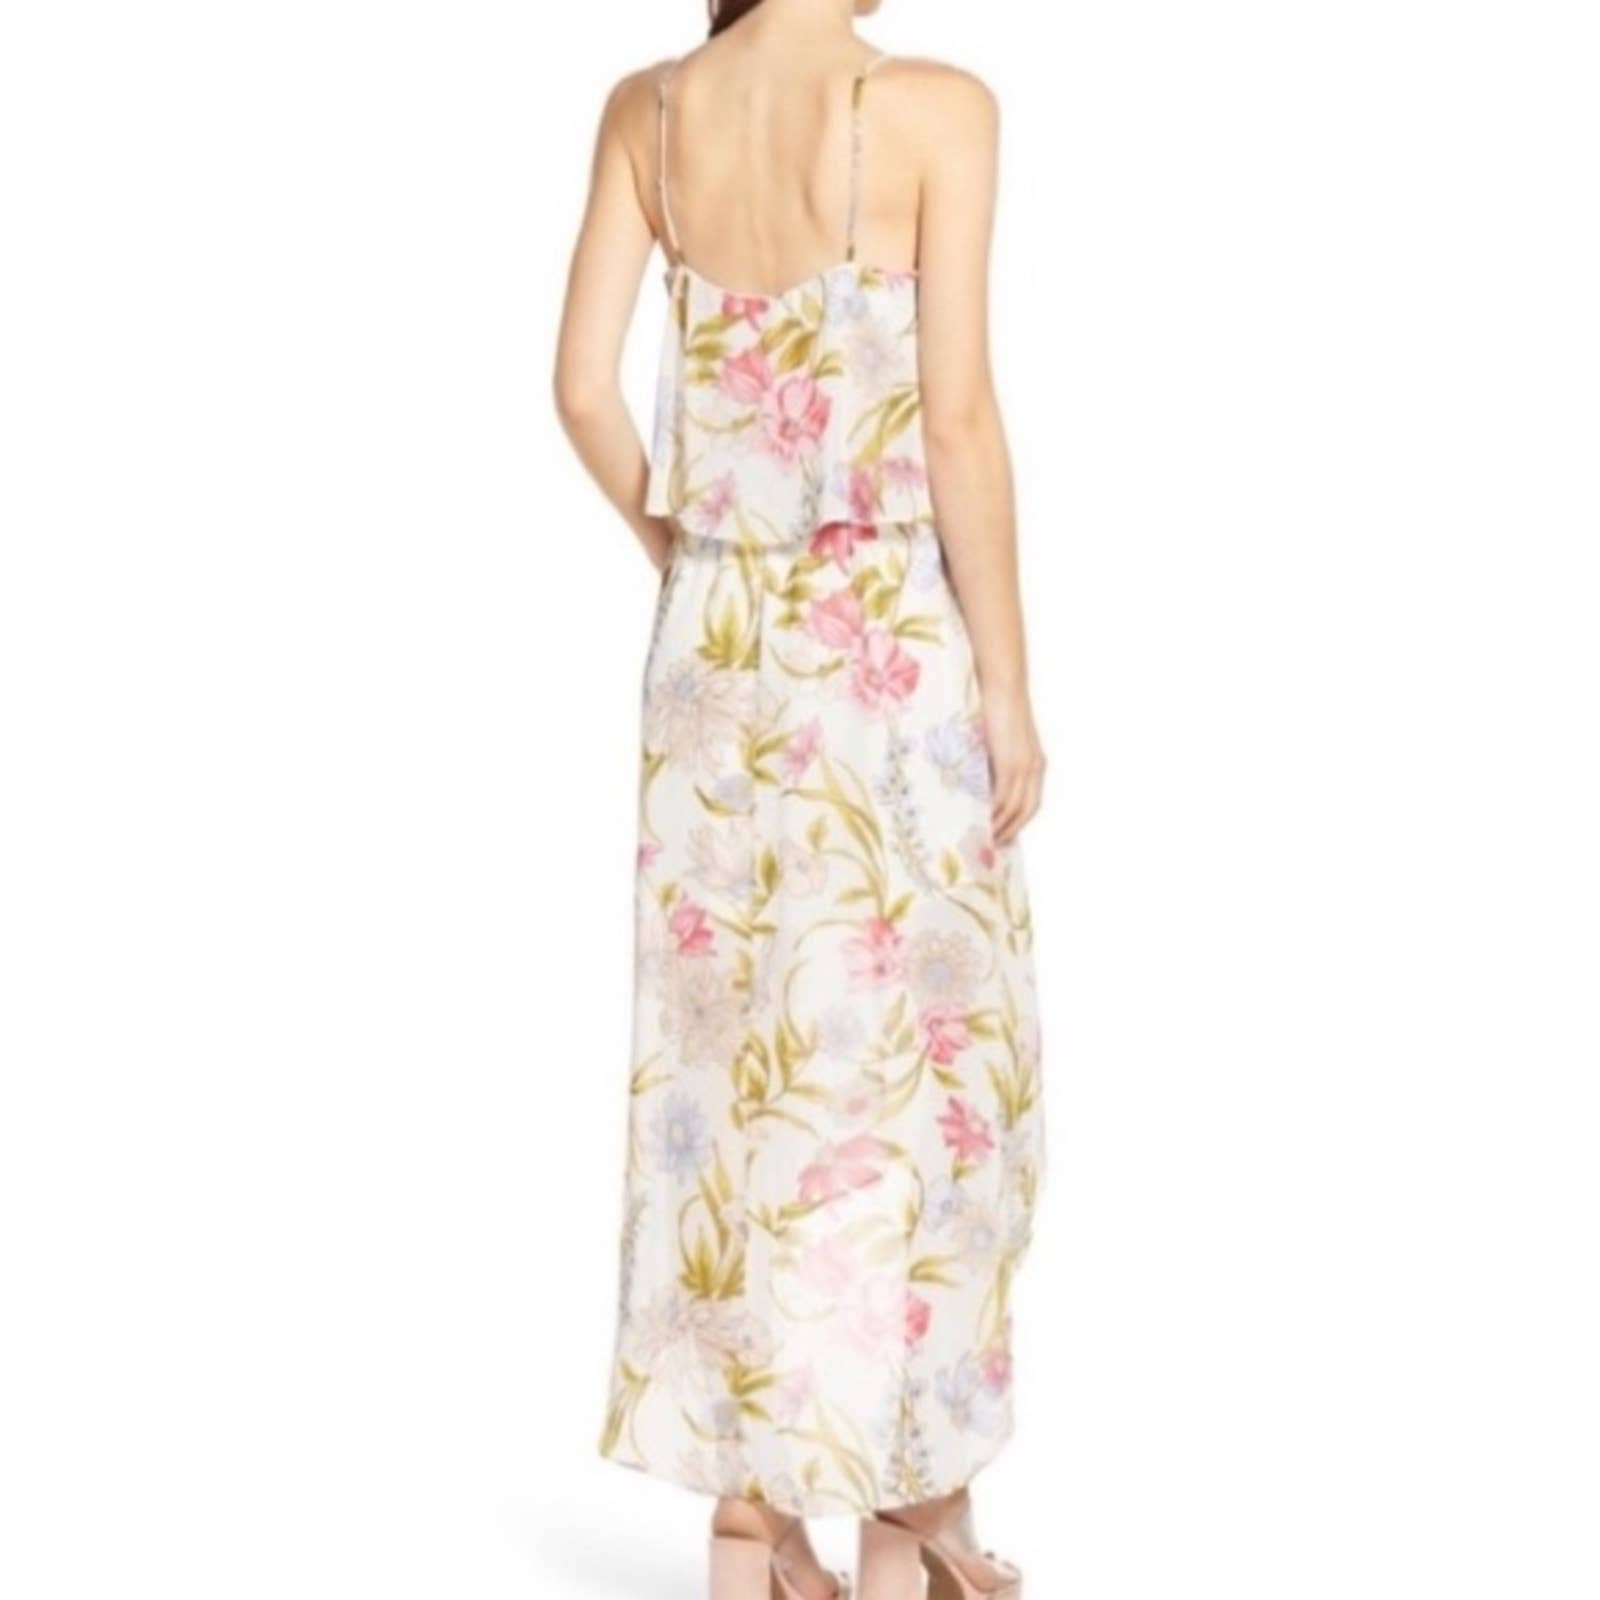 Popular NWT June and Hudson floral hi low dress lDSOAvzo8 Buying Cheap